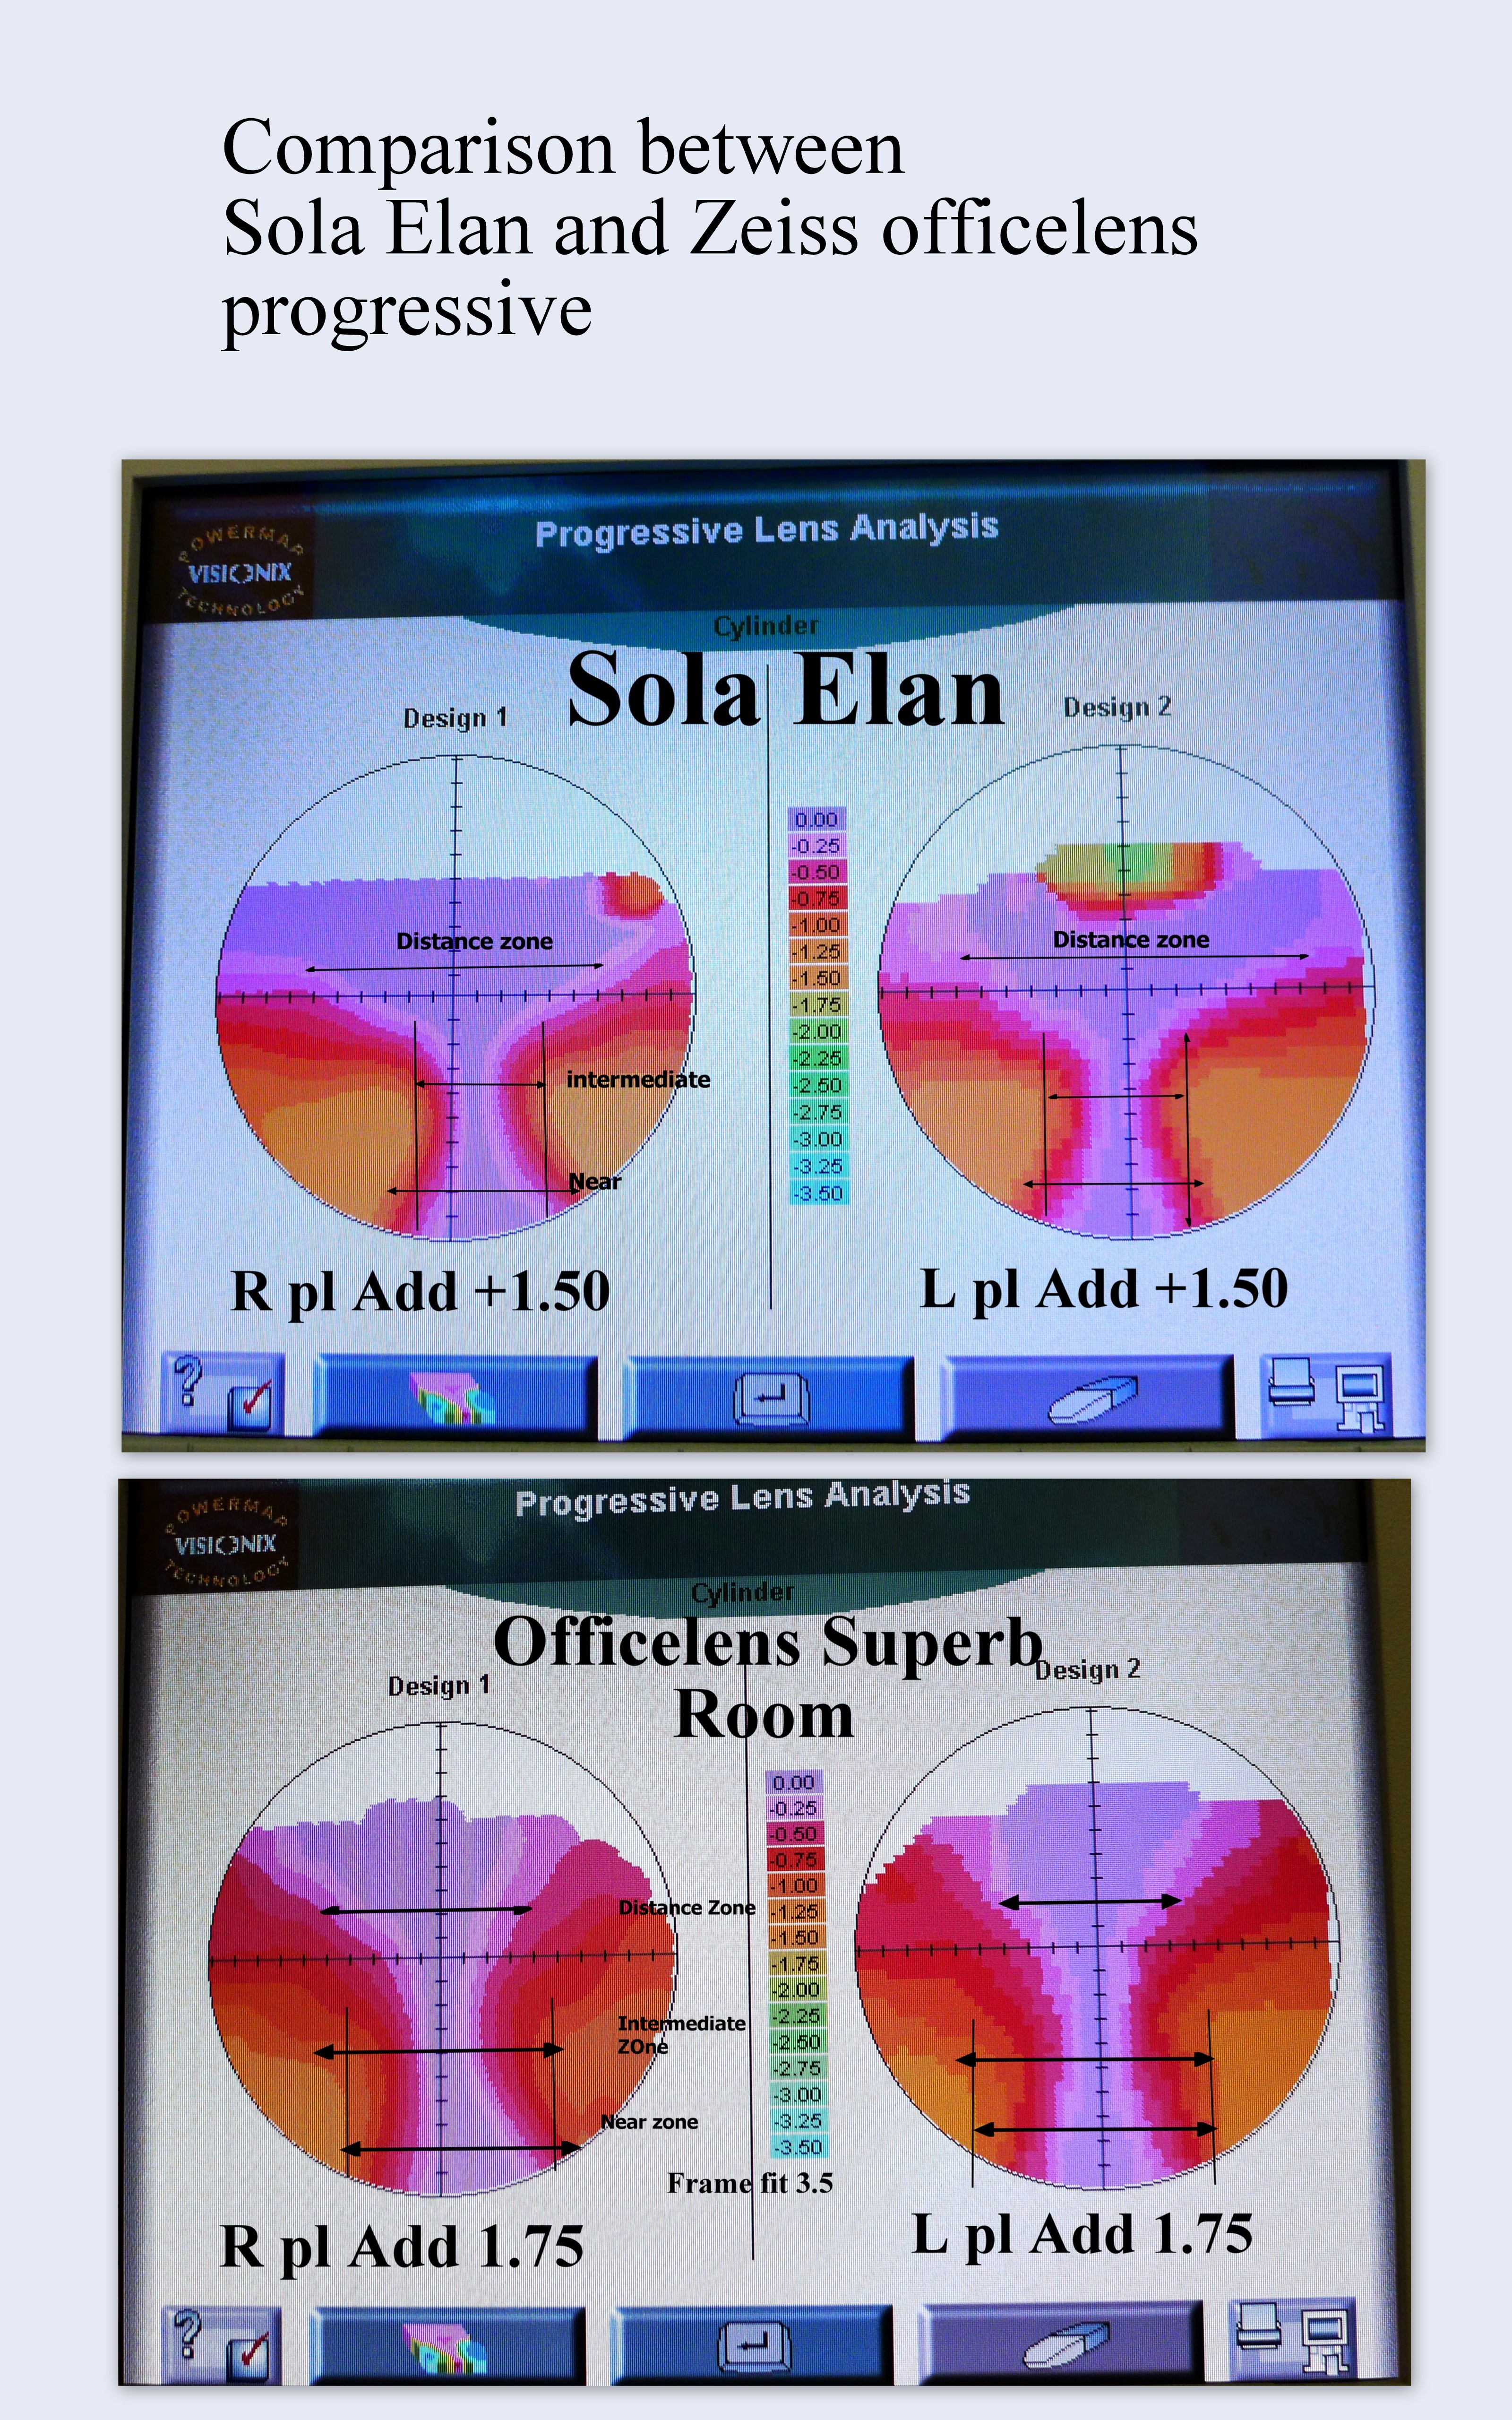 compare zeiss office_sola Elan